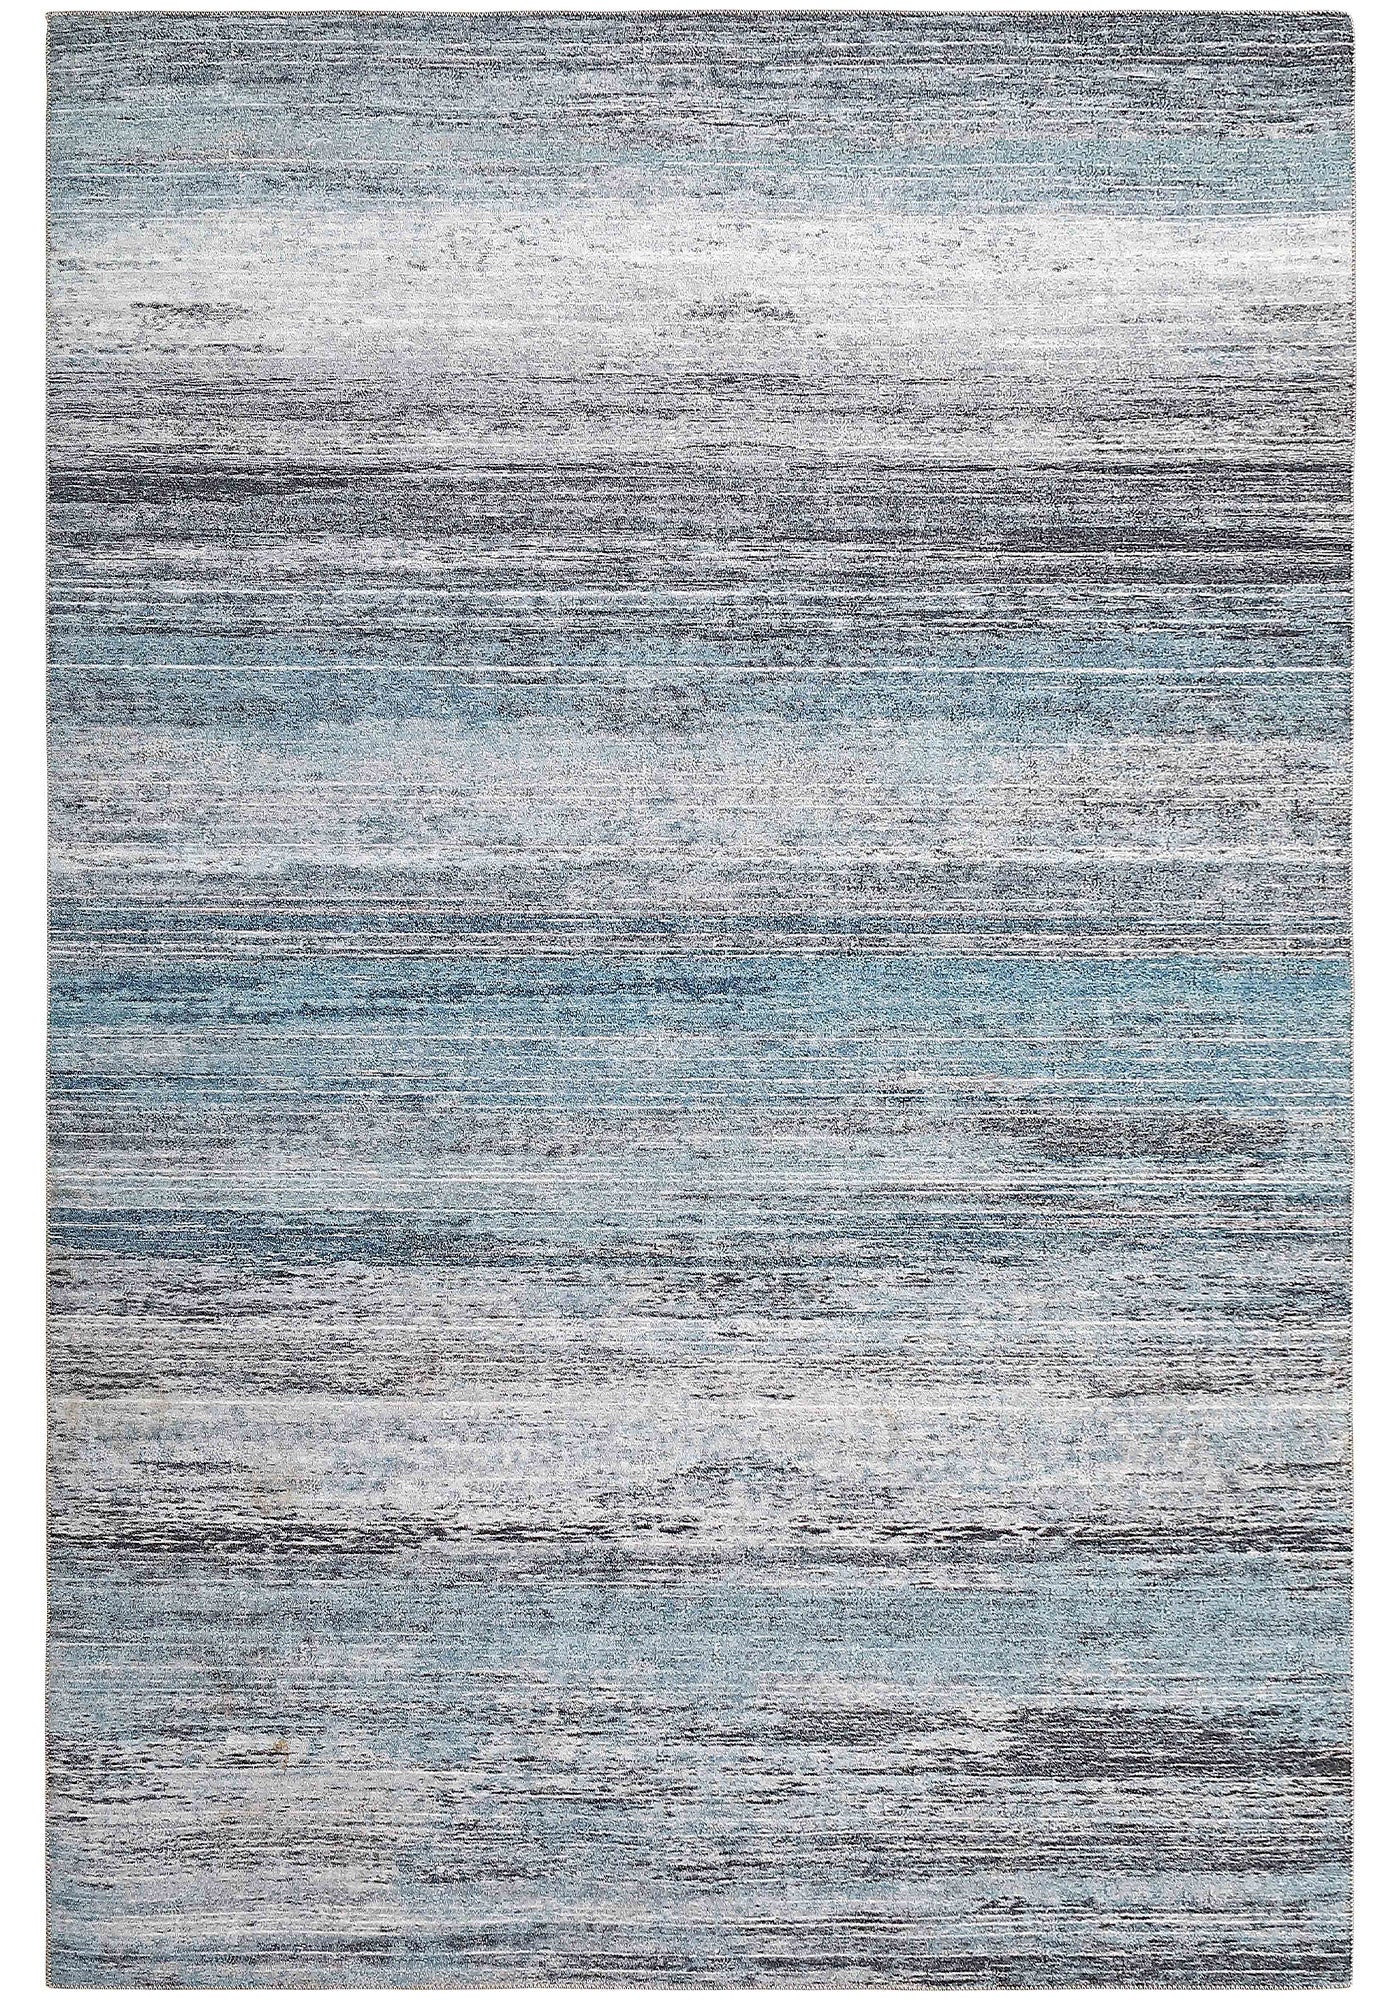 8' X 11' Turquoise and Gray Abstract Stain Resistant Area Rug